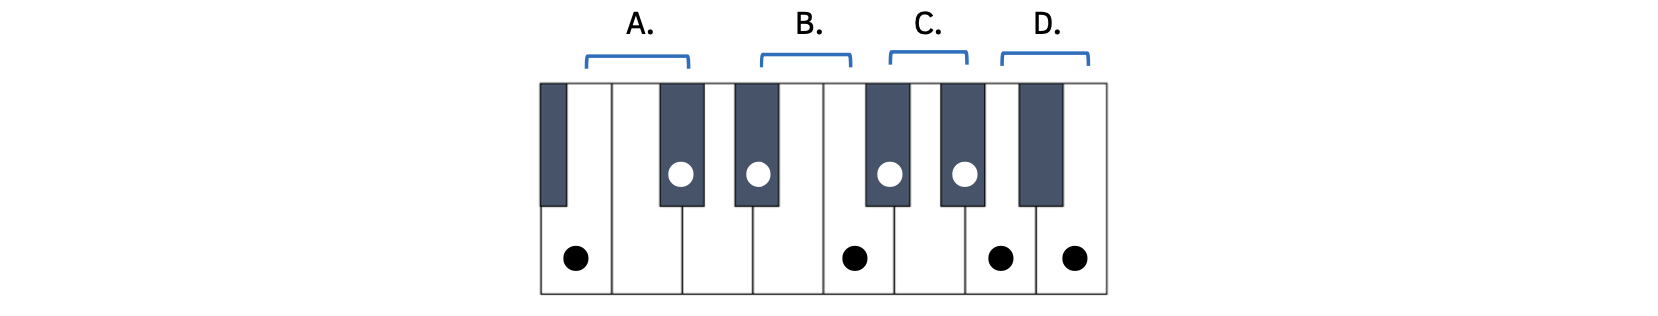 Whole steps on a keyboard shown. Example A shows a whole step between B and the black key to the right. Example B shows a whole step between F and the black key to the left. Example C shows a whole step between two black keys. Example D shows a whole step between A and B.